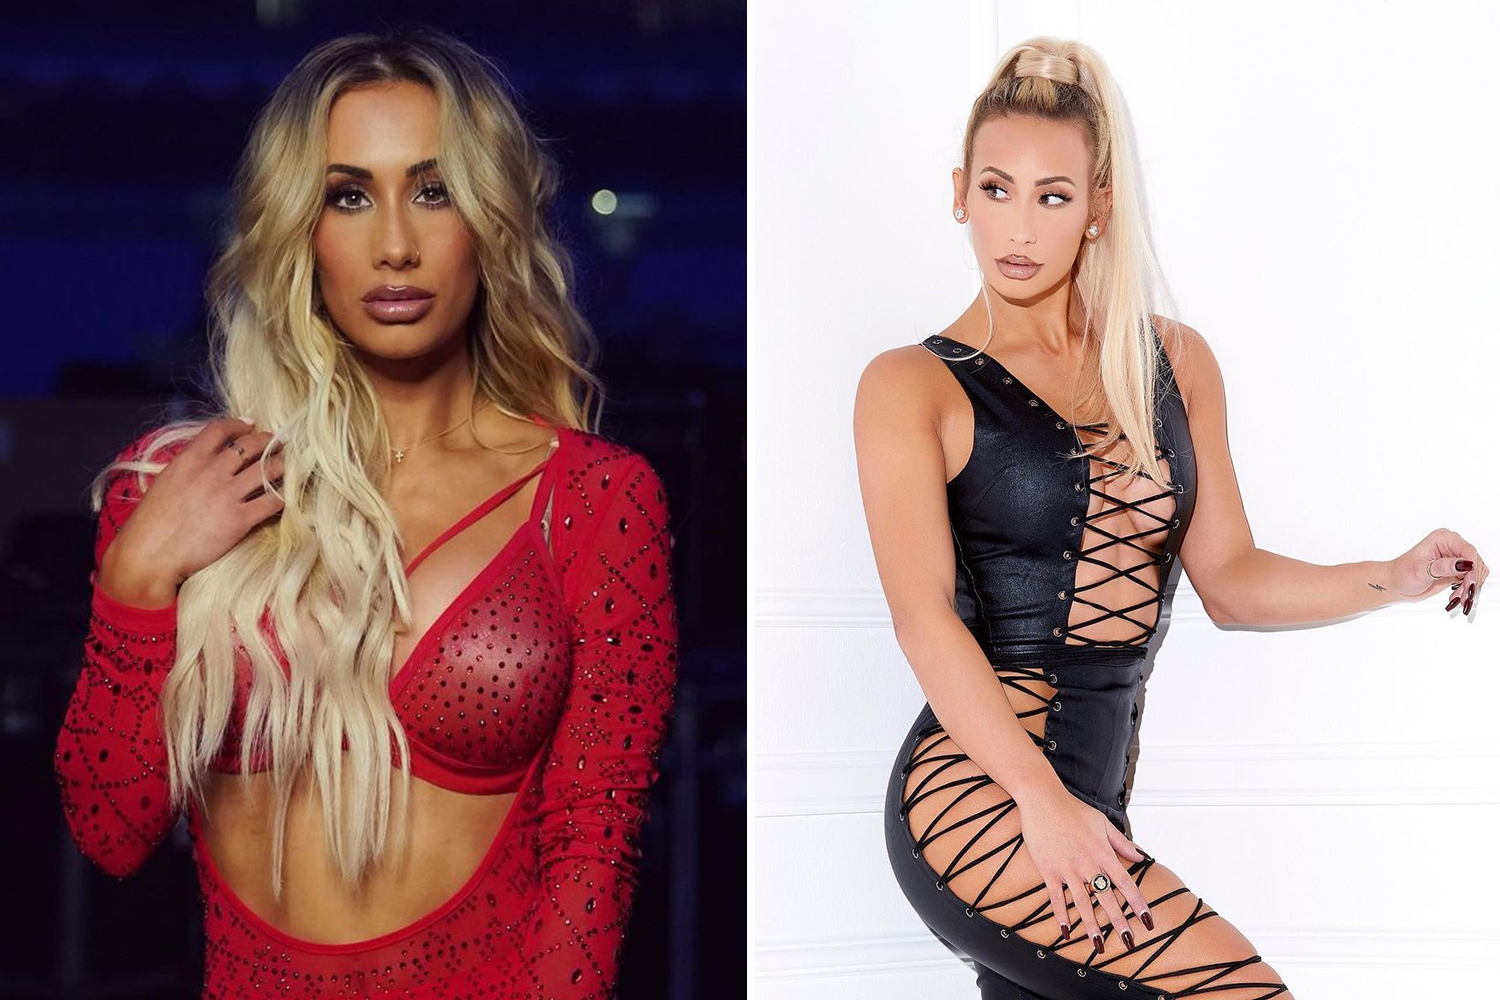 candice tackett recommends carmella wwe nude pic